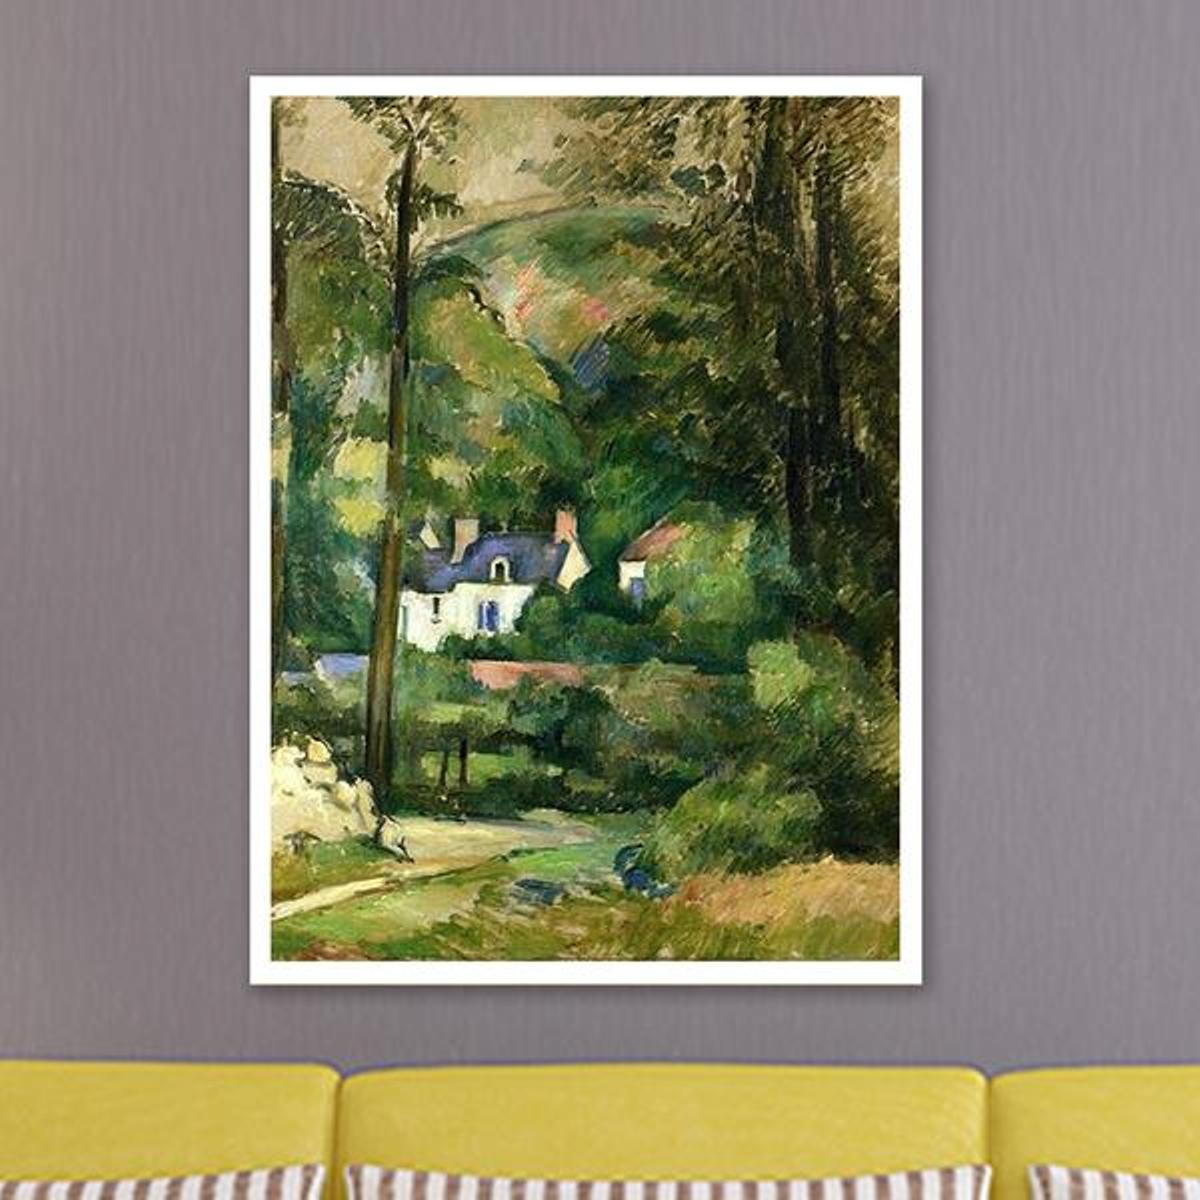 Houses in the Greenery by Paul Cezanne - Van-Go Paint-By-Number Kit